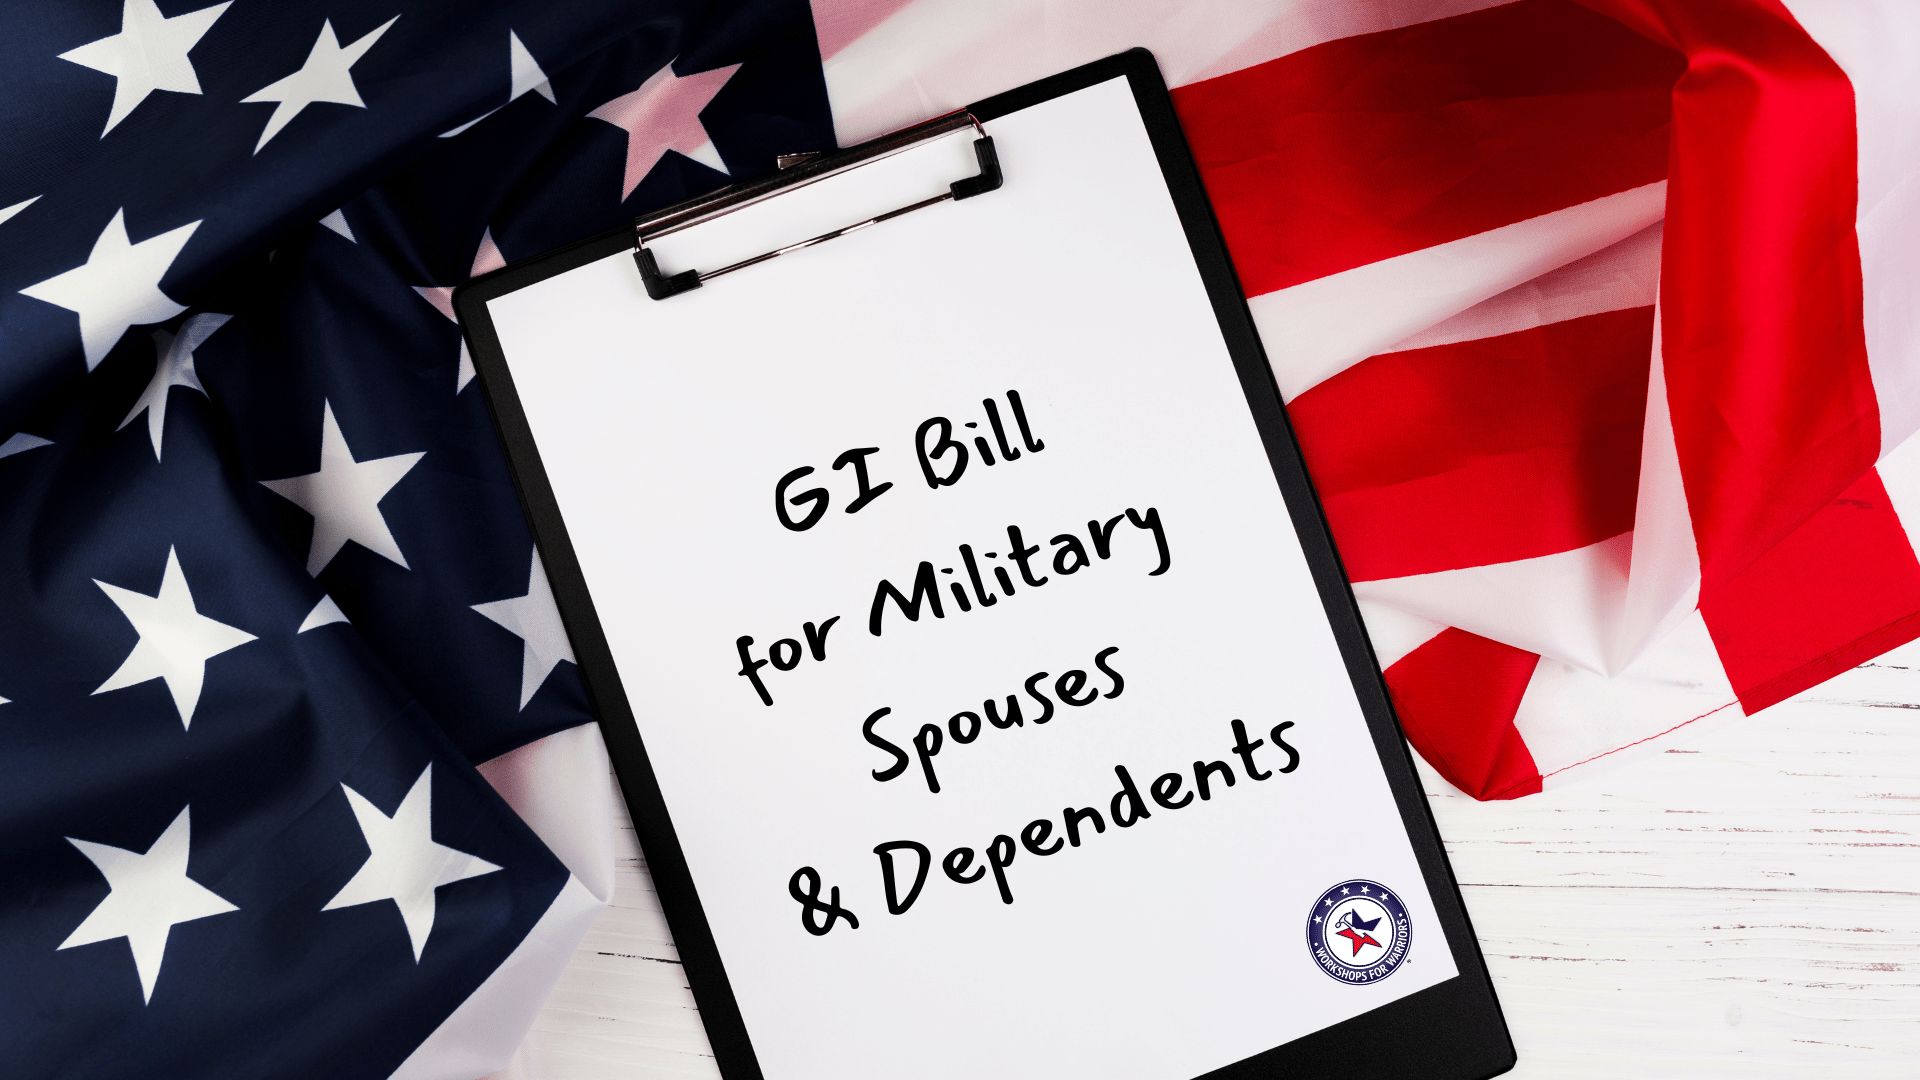 Clipboard on American flag that says GI Bill for Military Spouses and Dependents